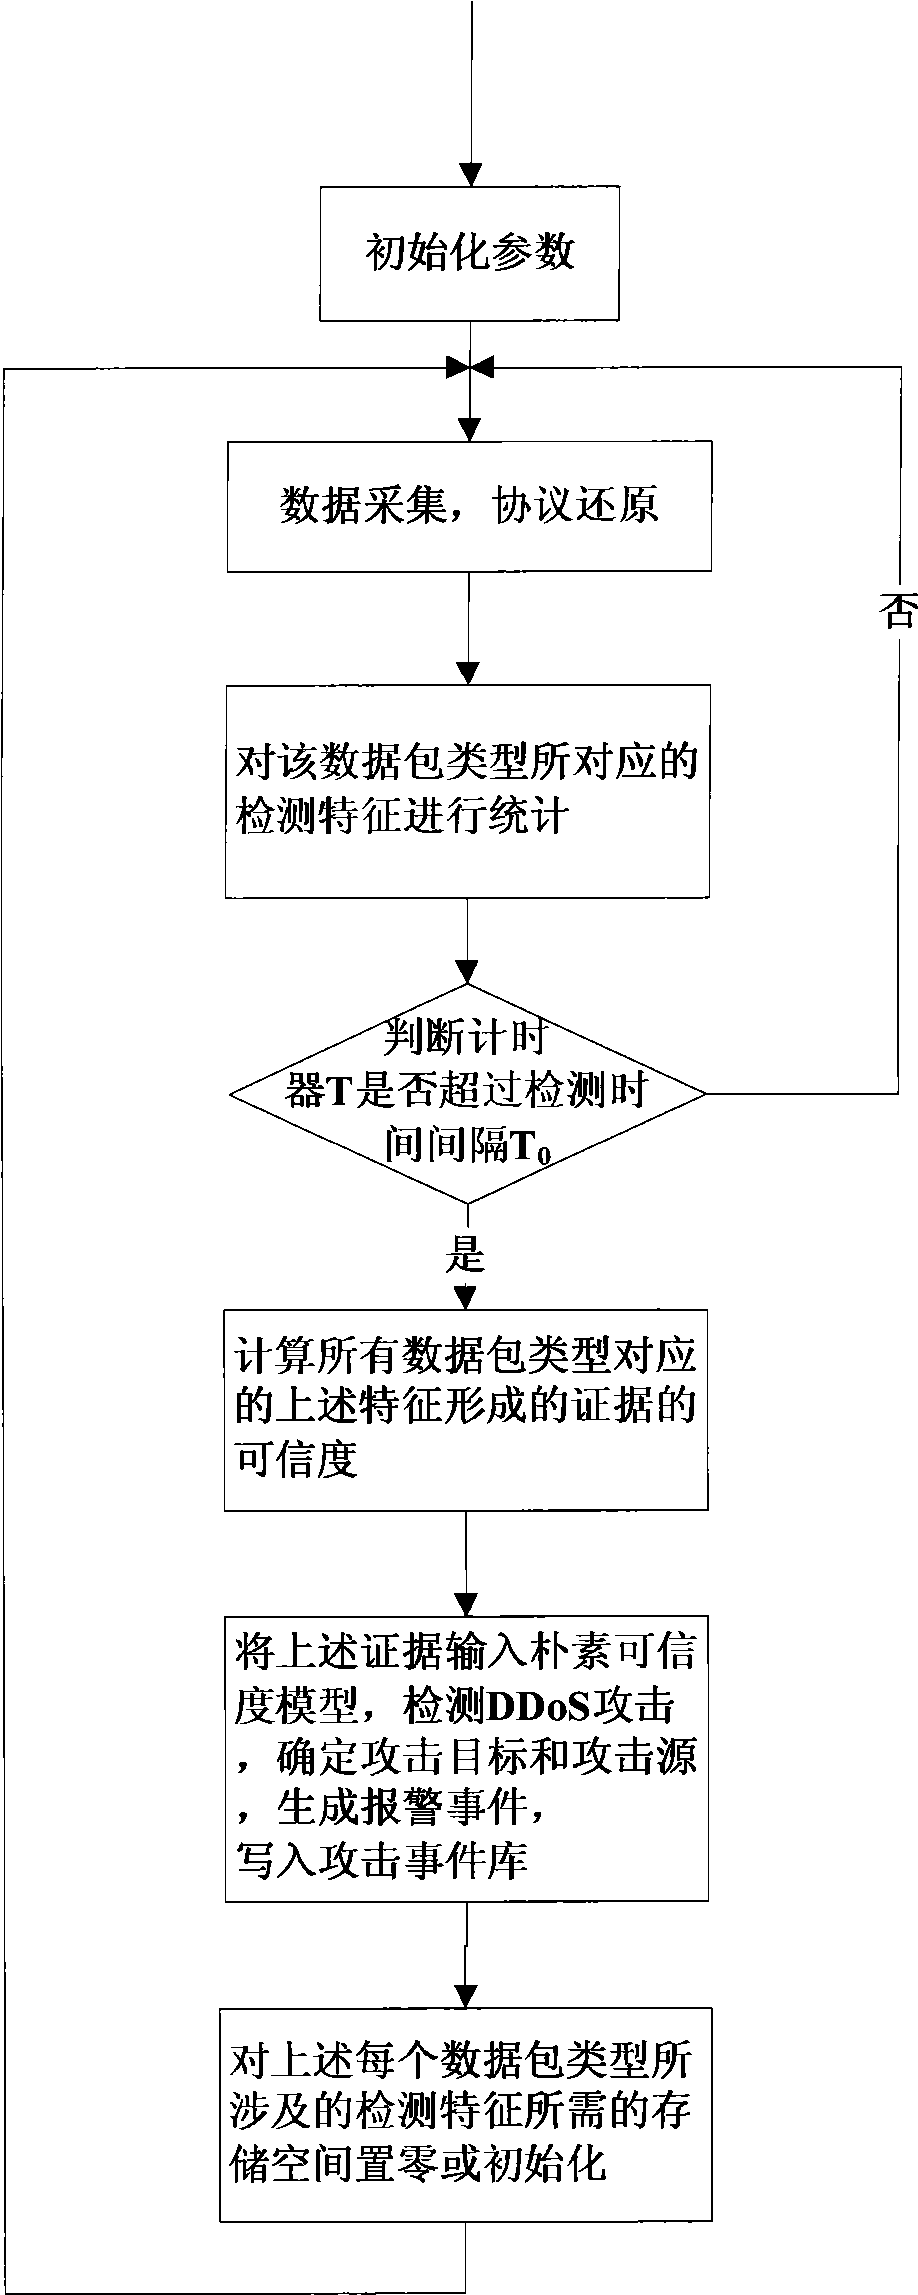 Method and system for detecting distributed denial of service attack